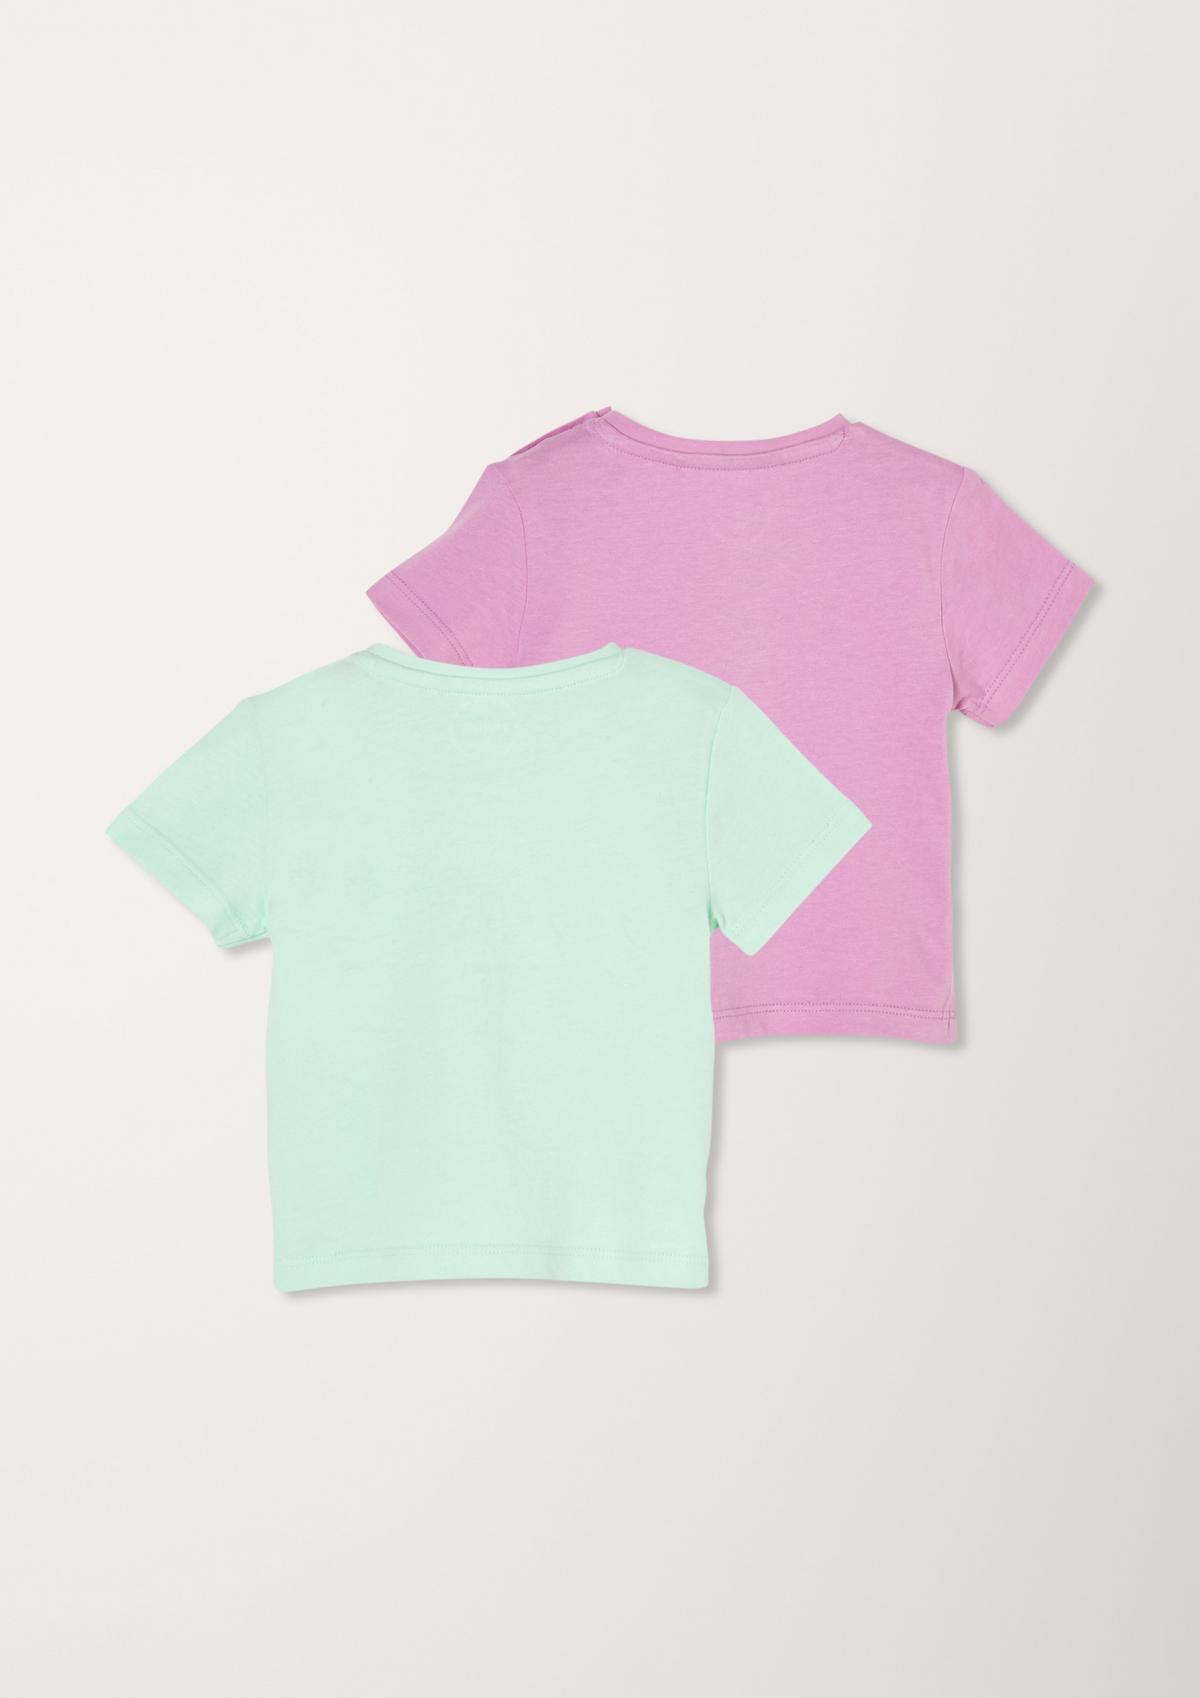 s.Oliver Cotton T-shirt in a double pack